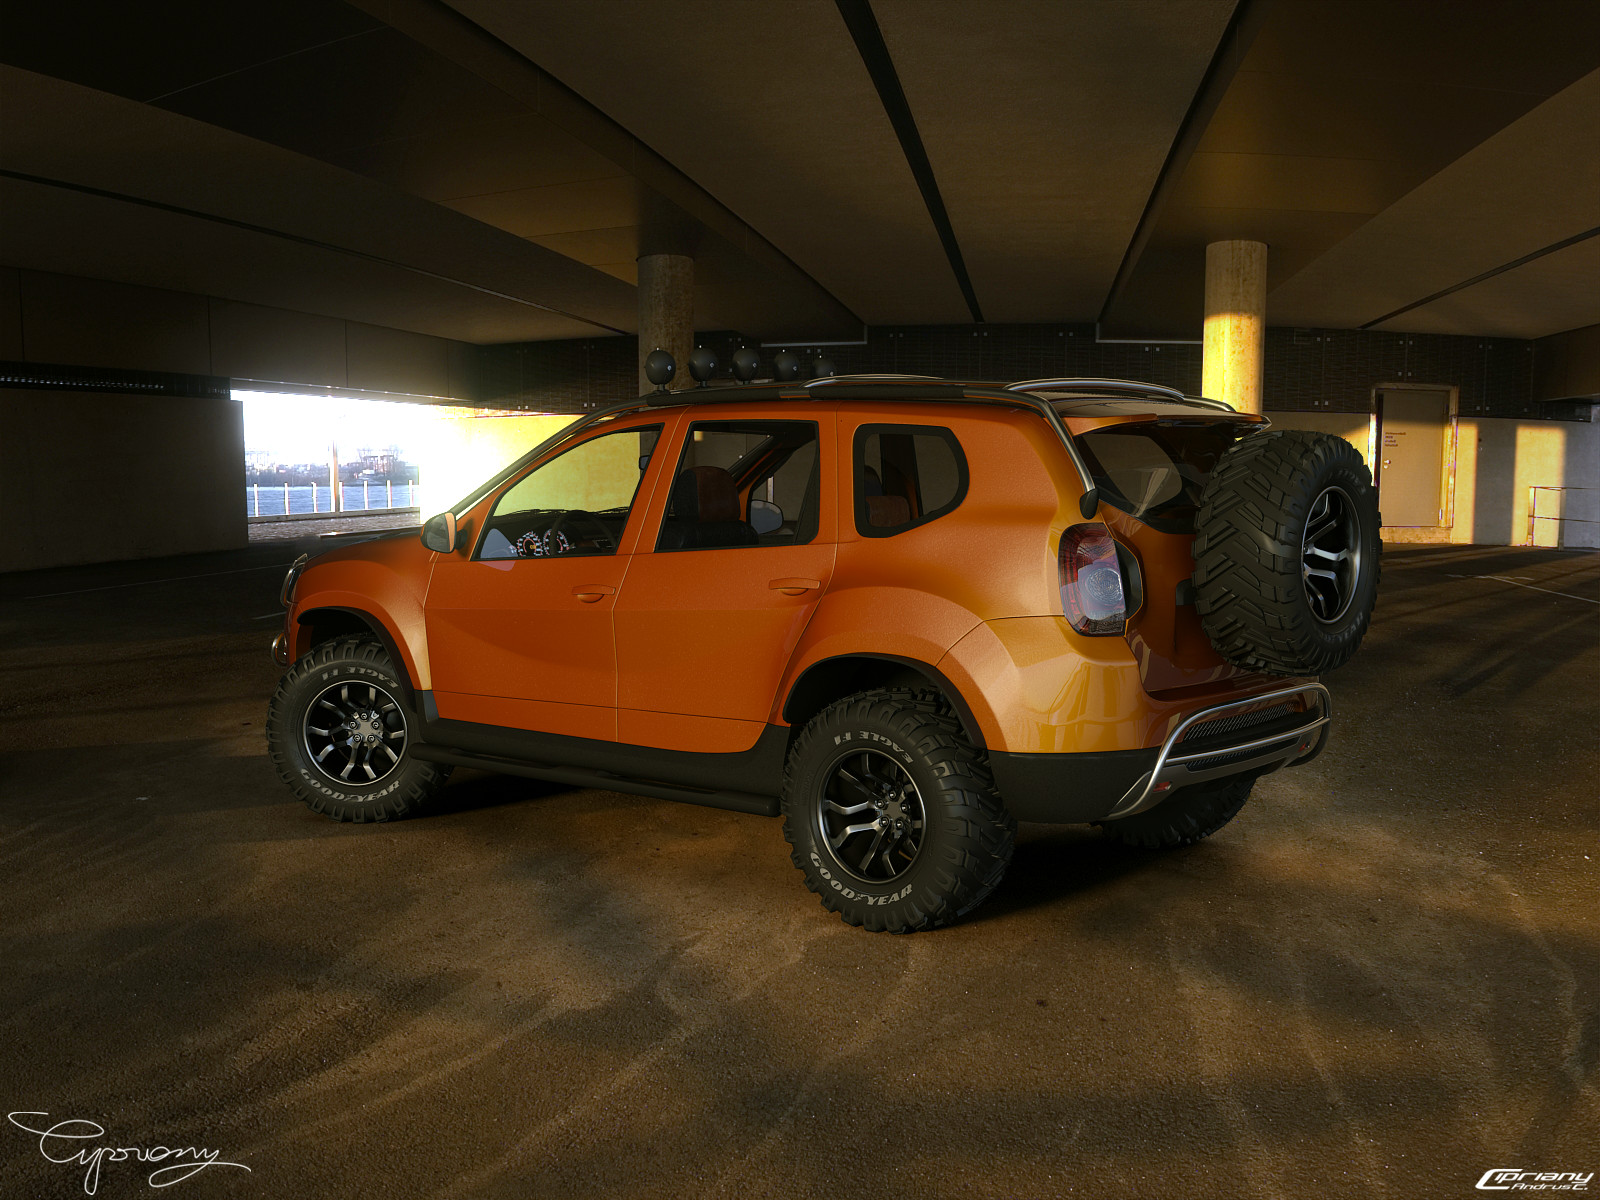 Dacia_Duster_Tuning_14_by_cipriany.jpg